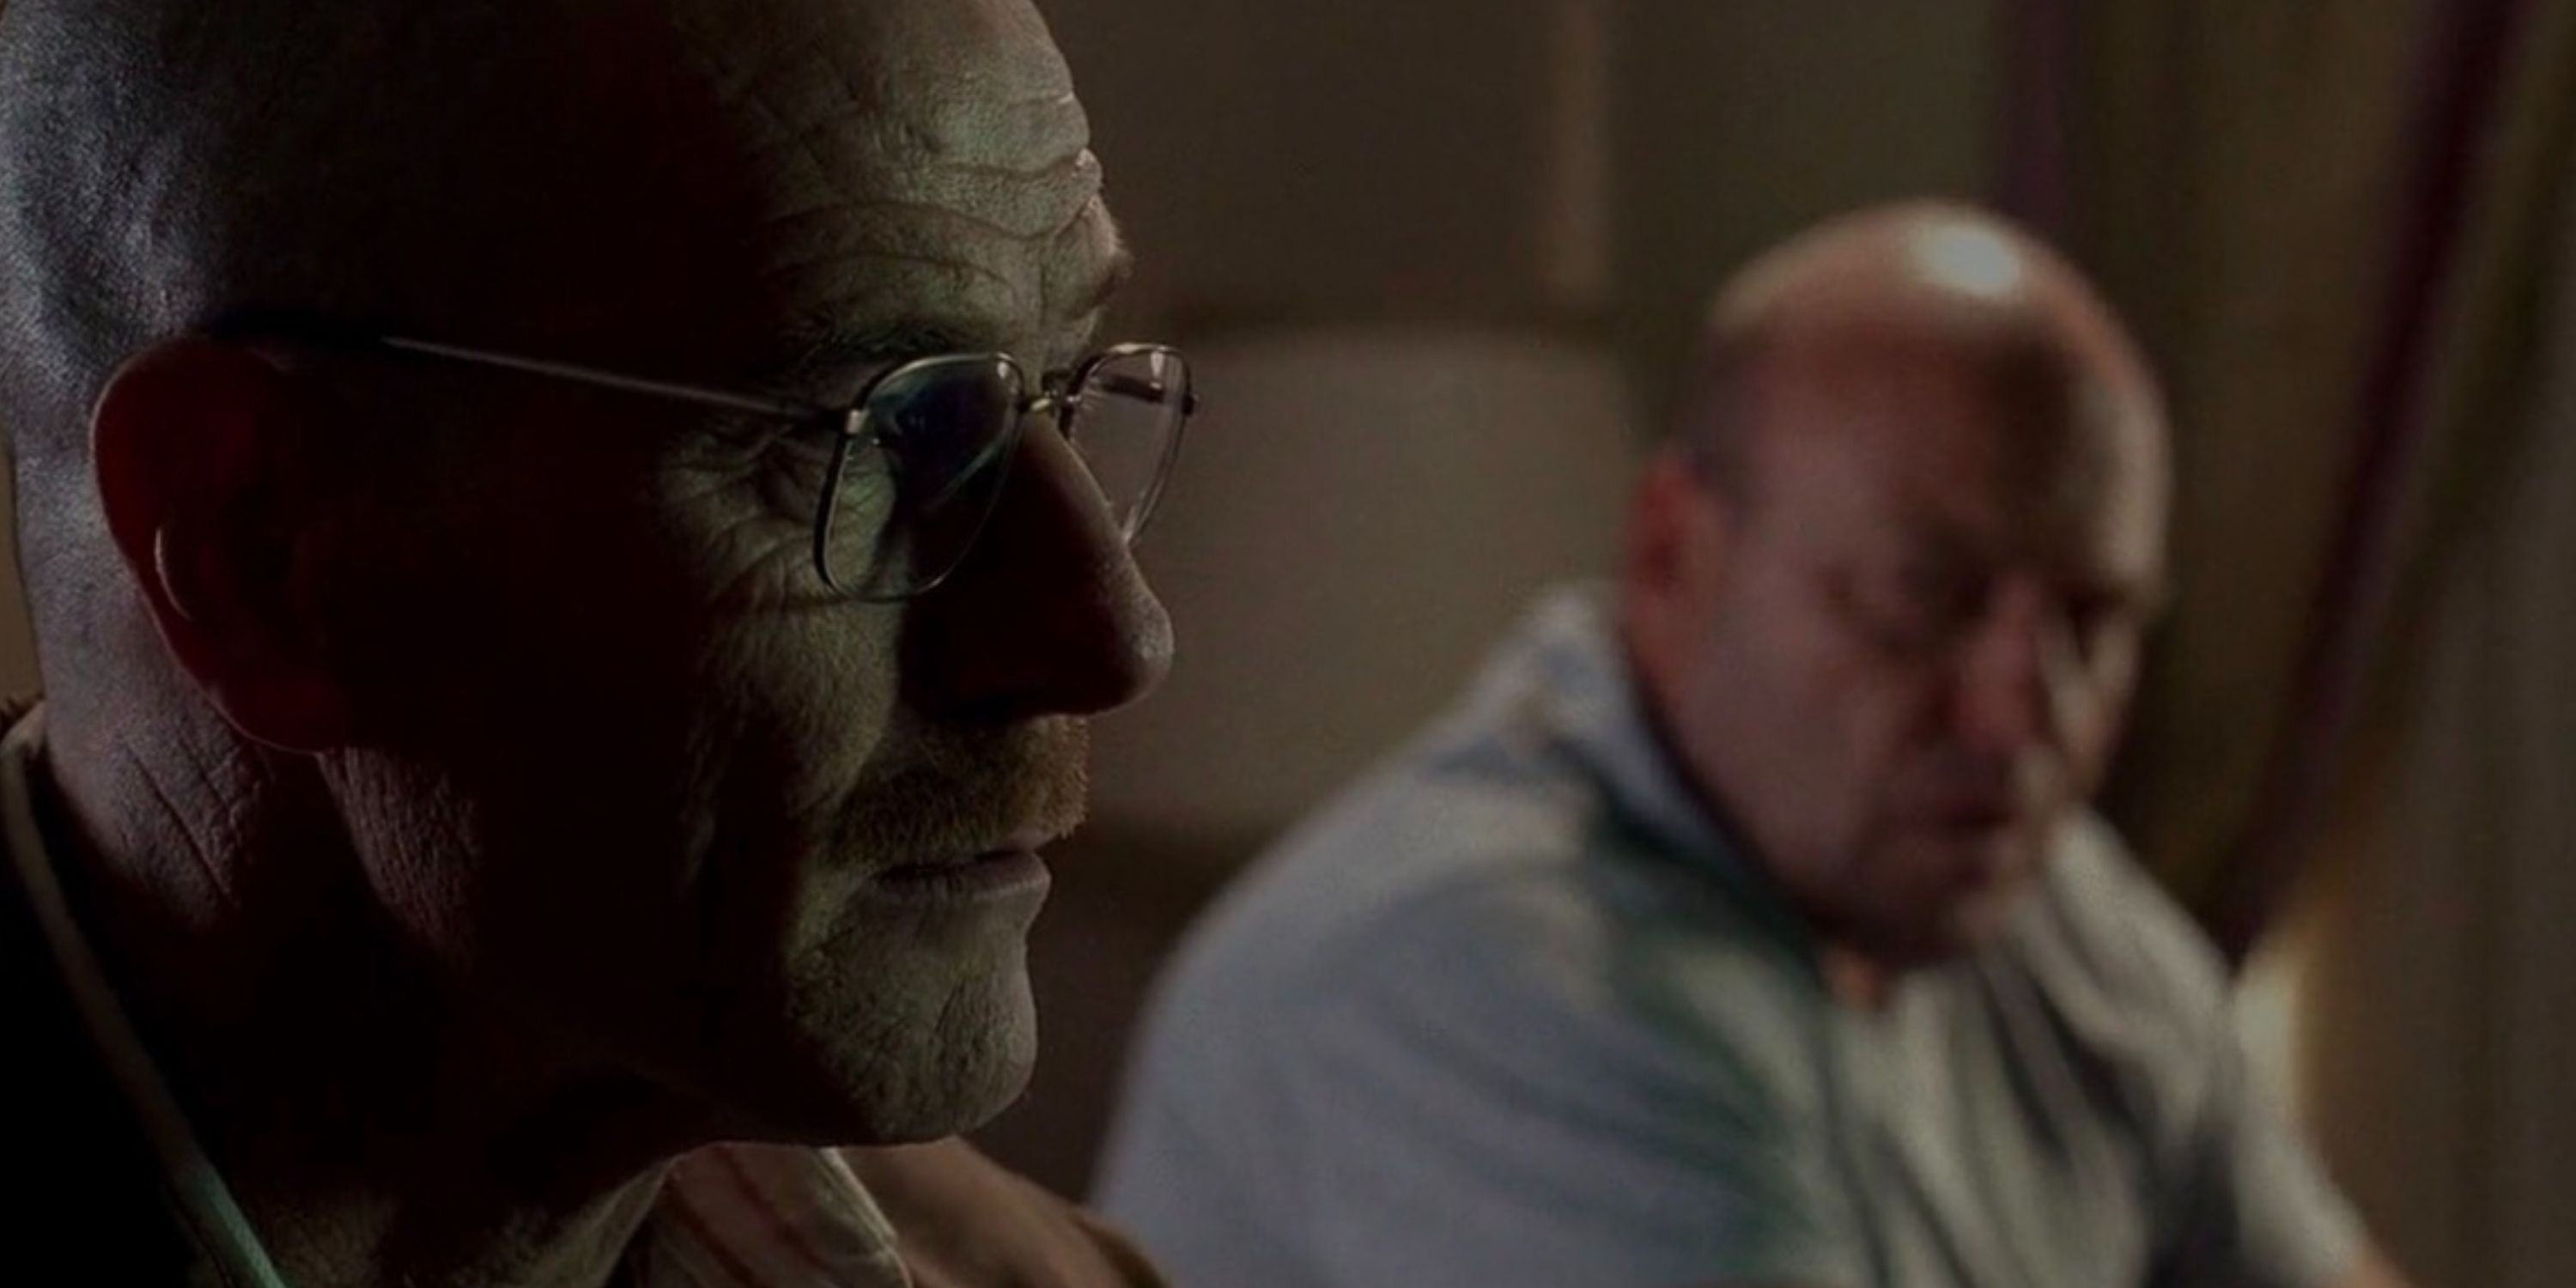 Walt talking with Hank in the Breaking Bad episode "Better Call Saul"